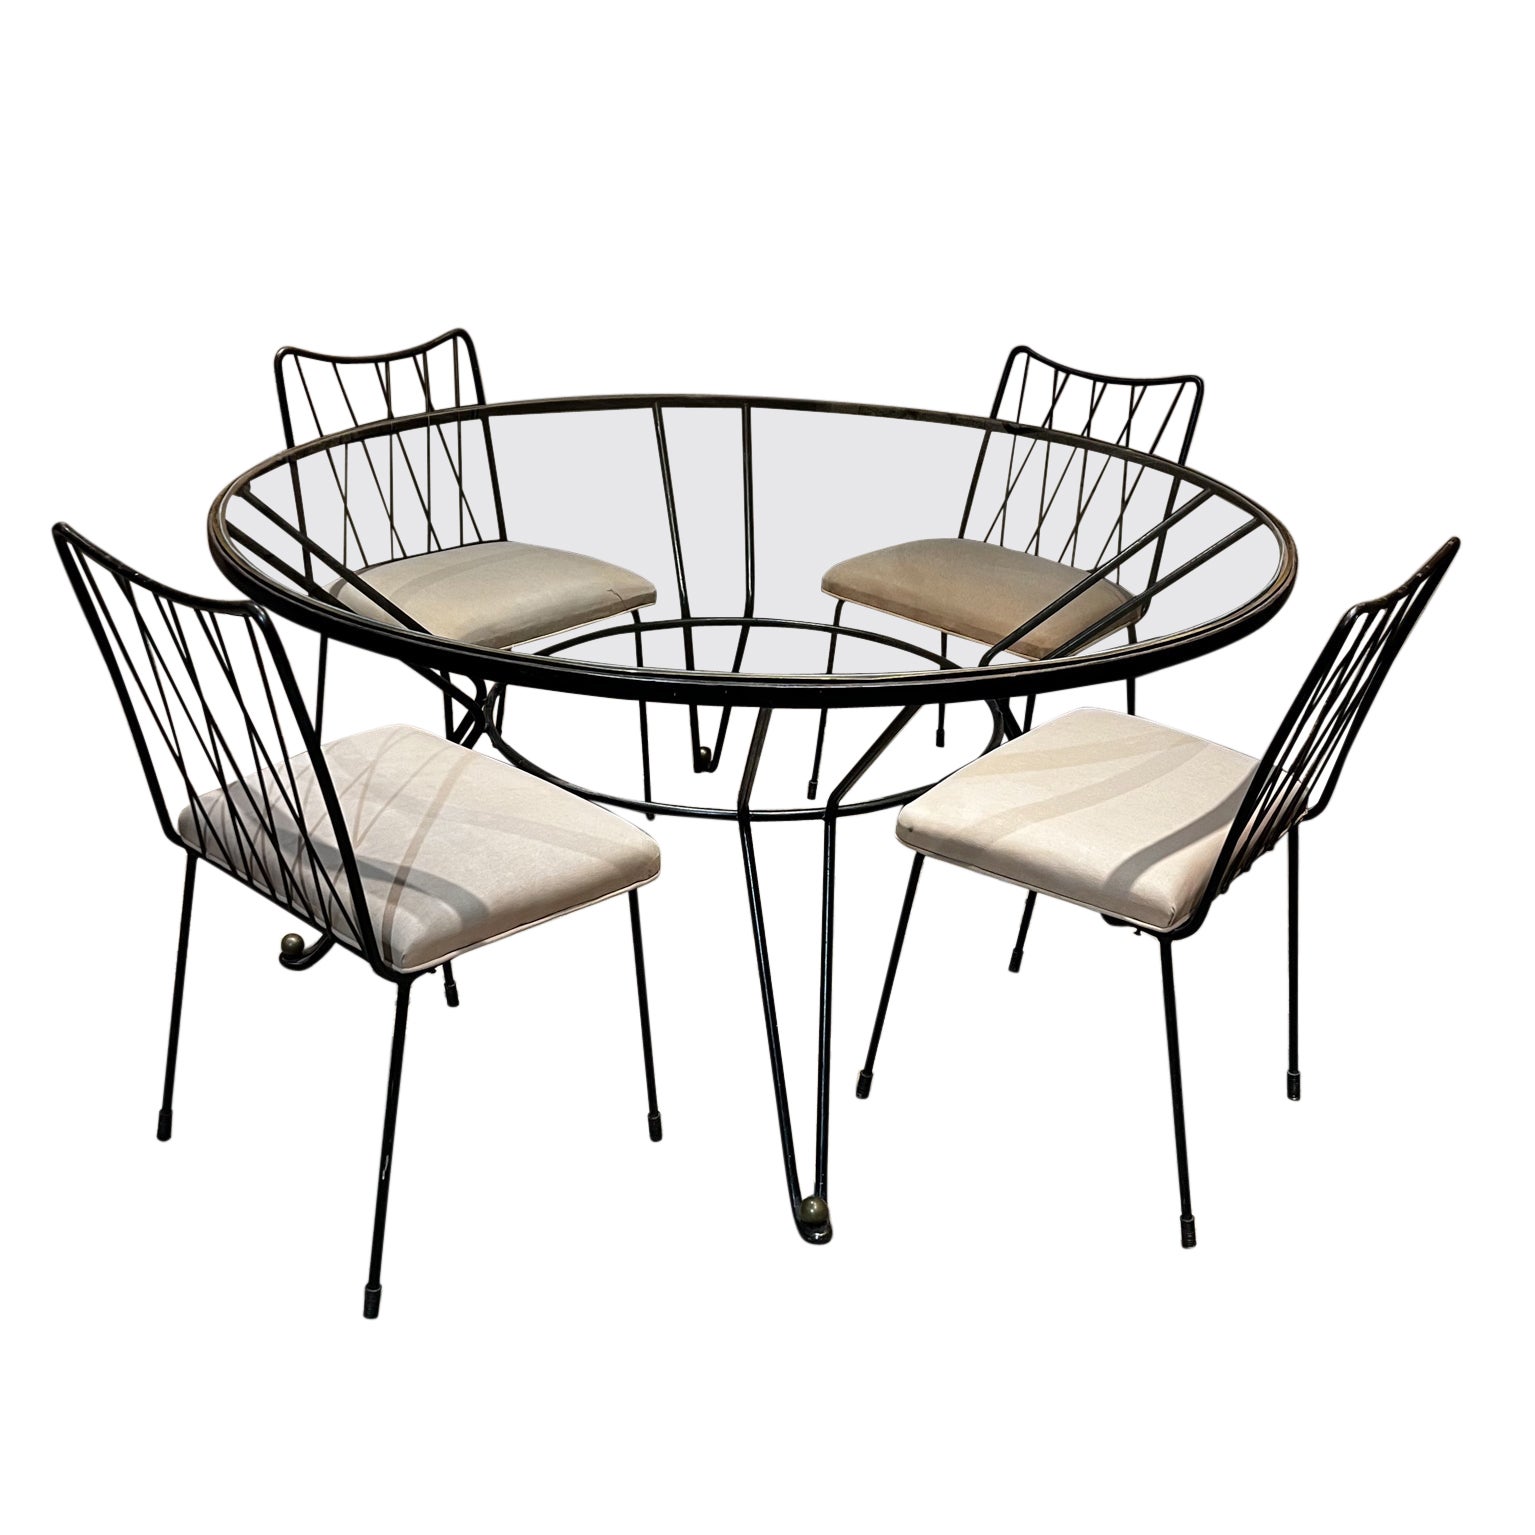 1950s French Style Bronze Iron Glass Dining Table Six Chairs Arturo Pani Mexico For Sale